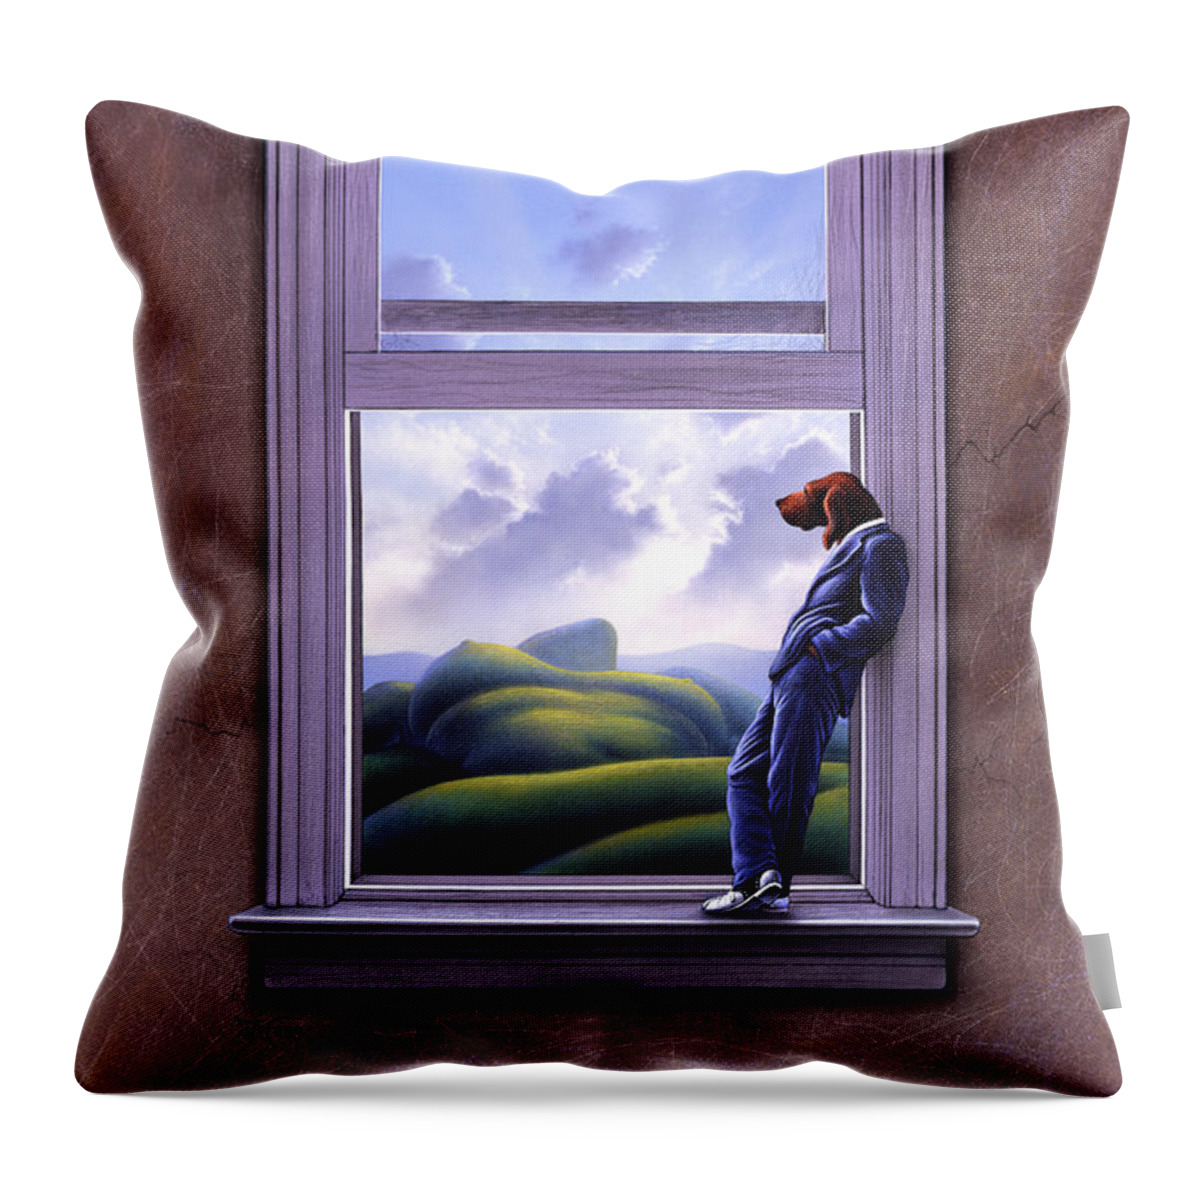 Surreal Throw Pillow featuring the painting Window of Dreams by Jerry LoFaro